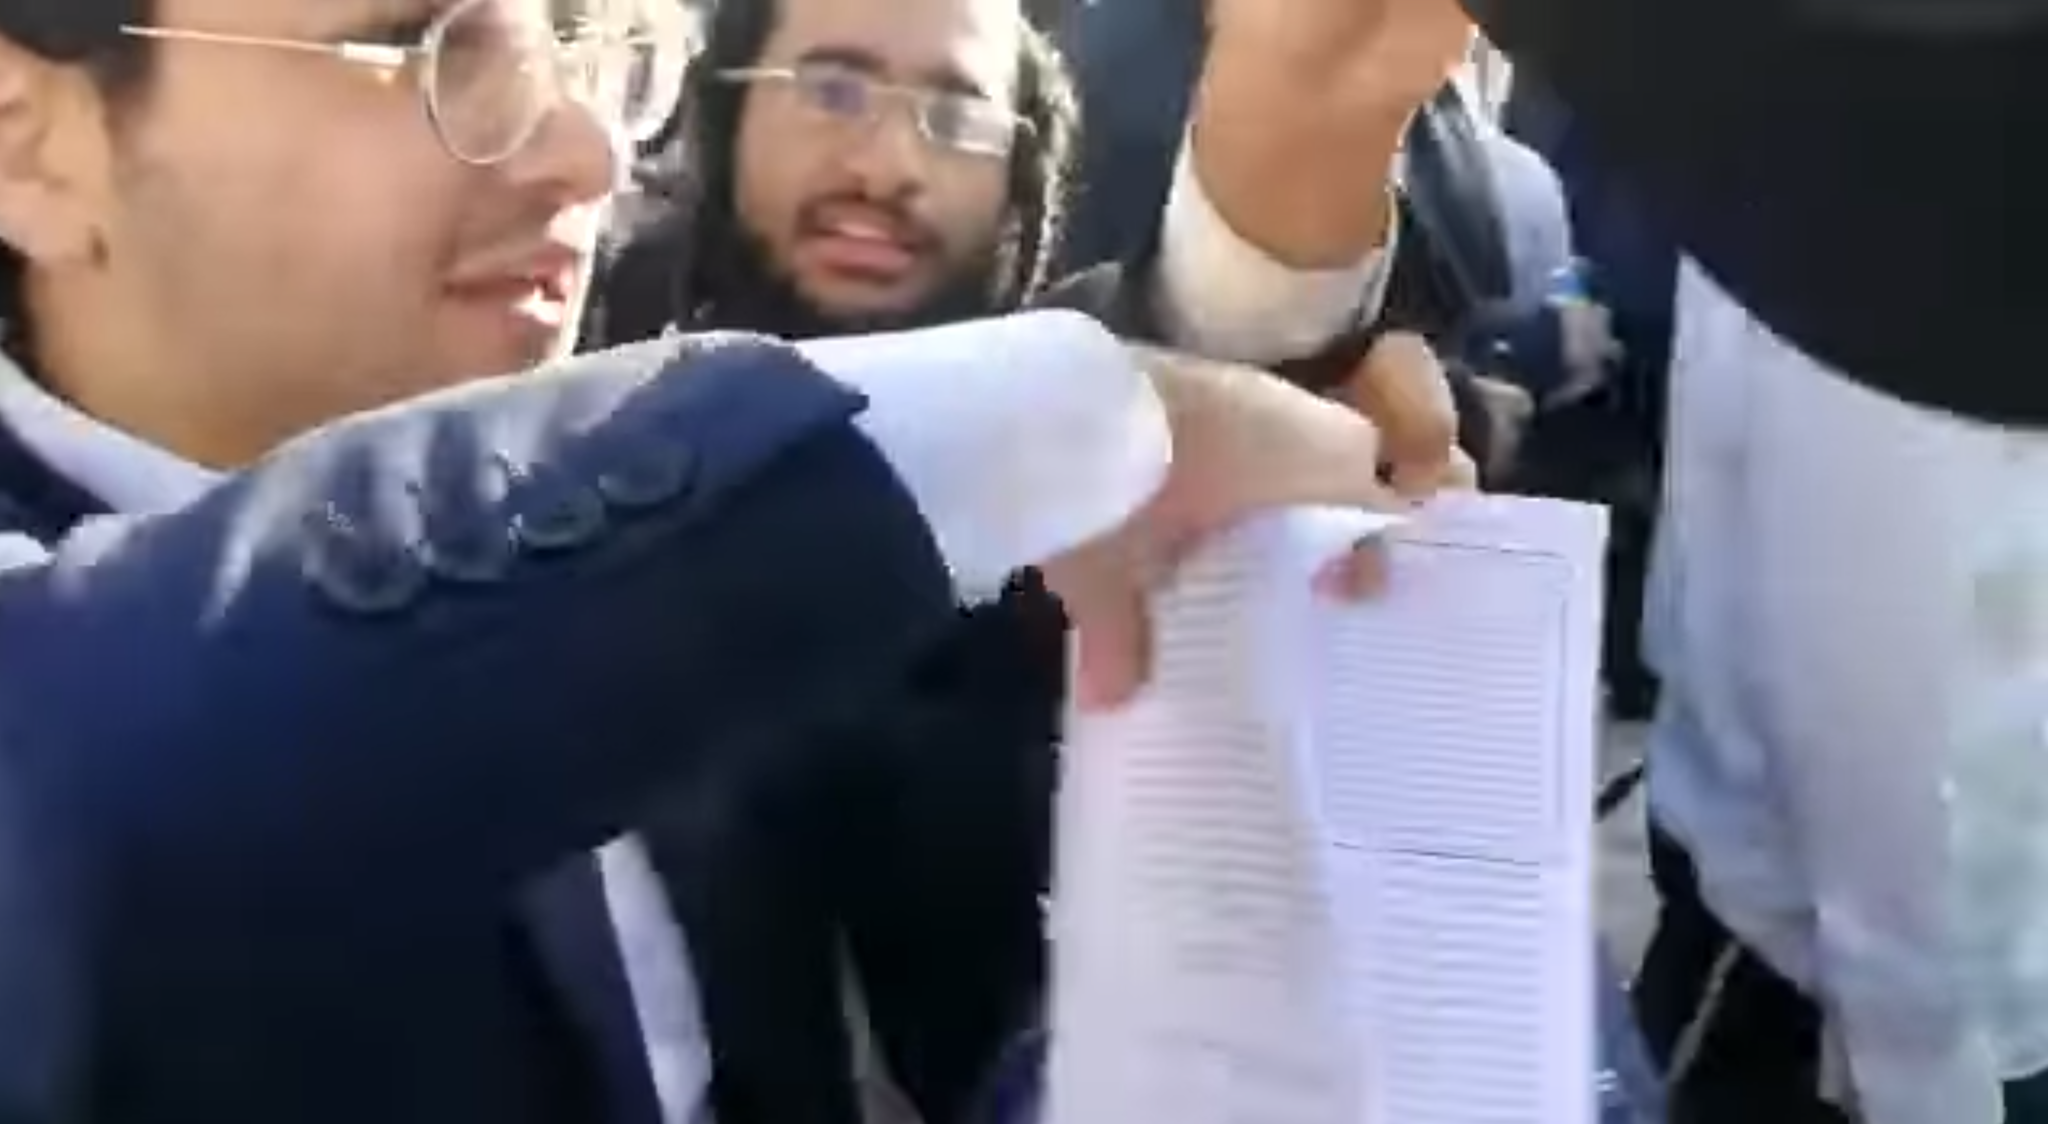 Haredi demonstrators harass Women of Wall worshipers, tear their prayer  books | The Times of Israel